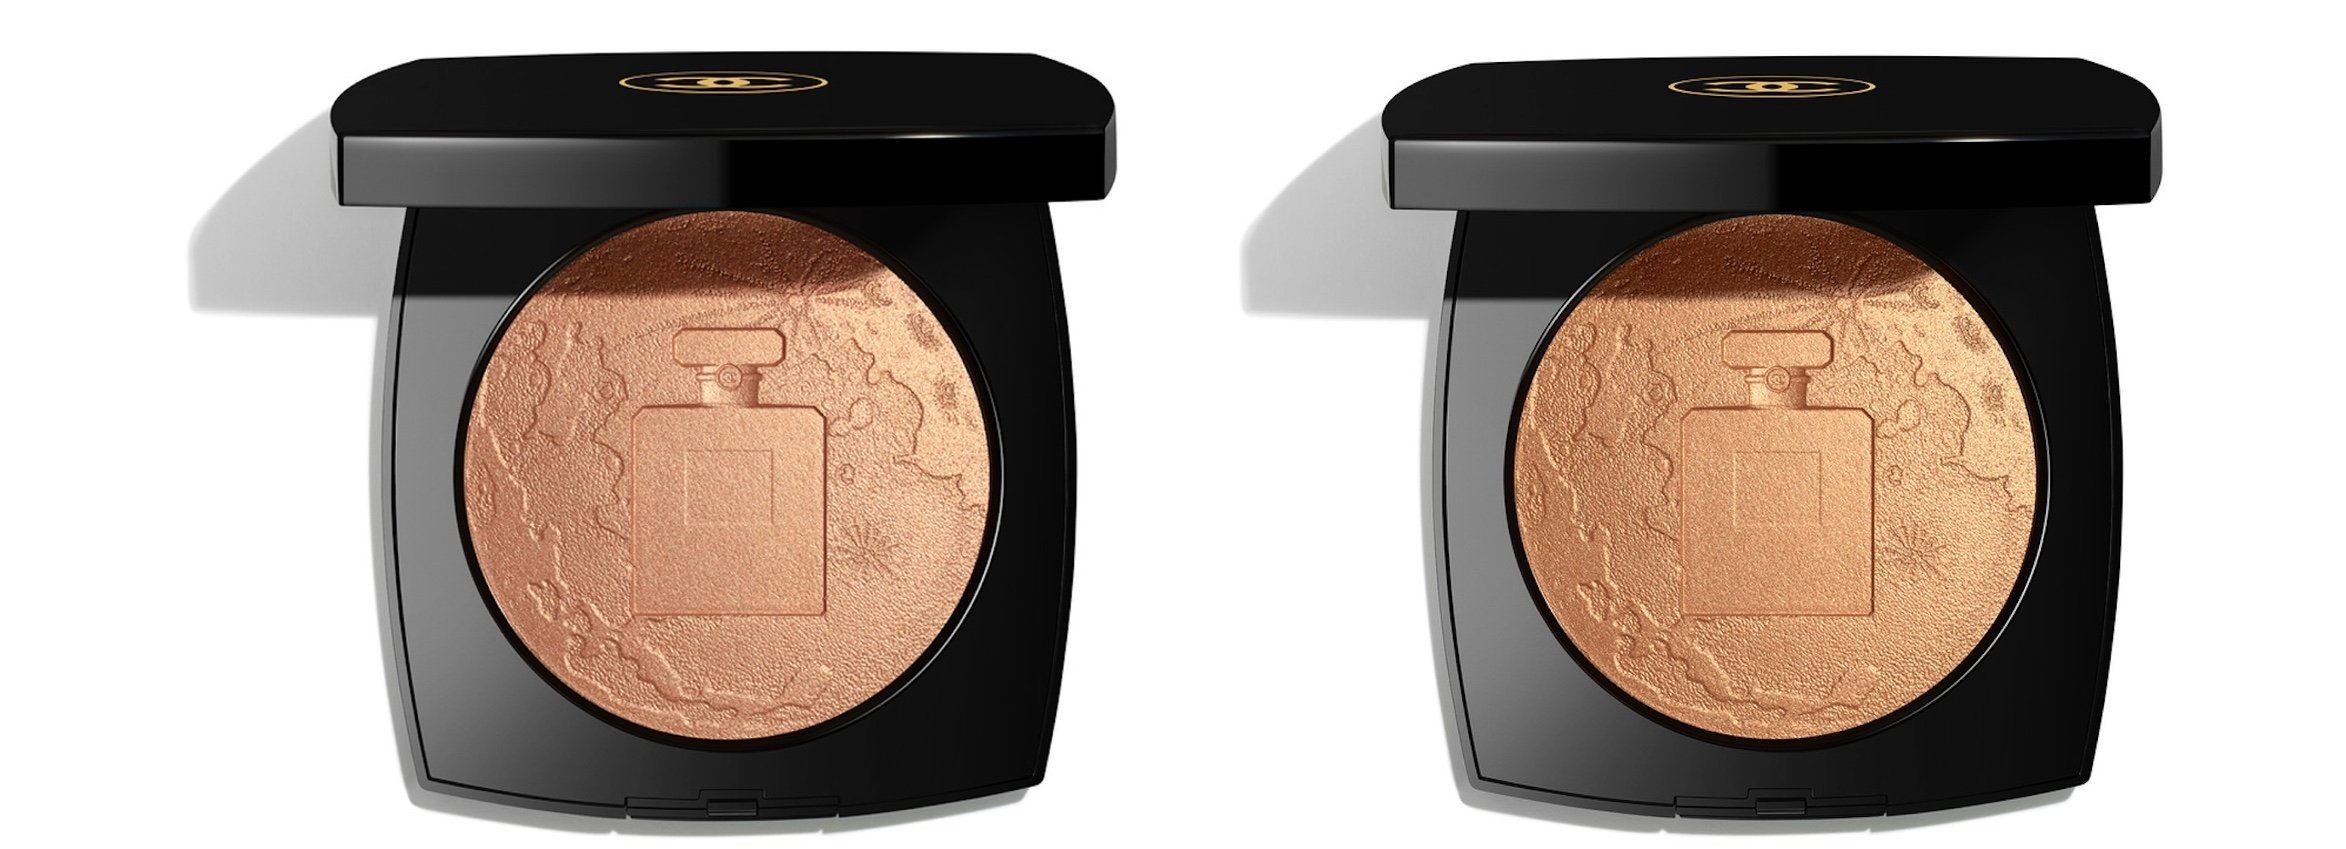 CHANEL HOLIDAY 2022 COLLECTION, ÉCLAT LUNAIRE illuminating powder